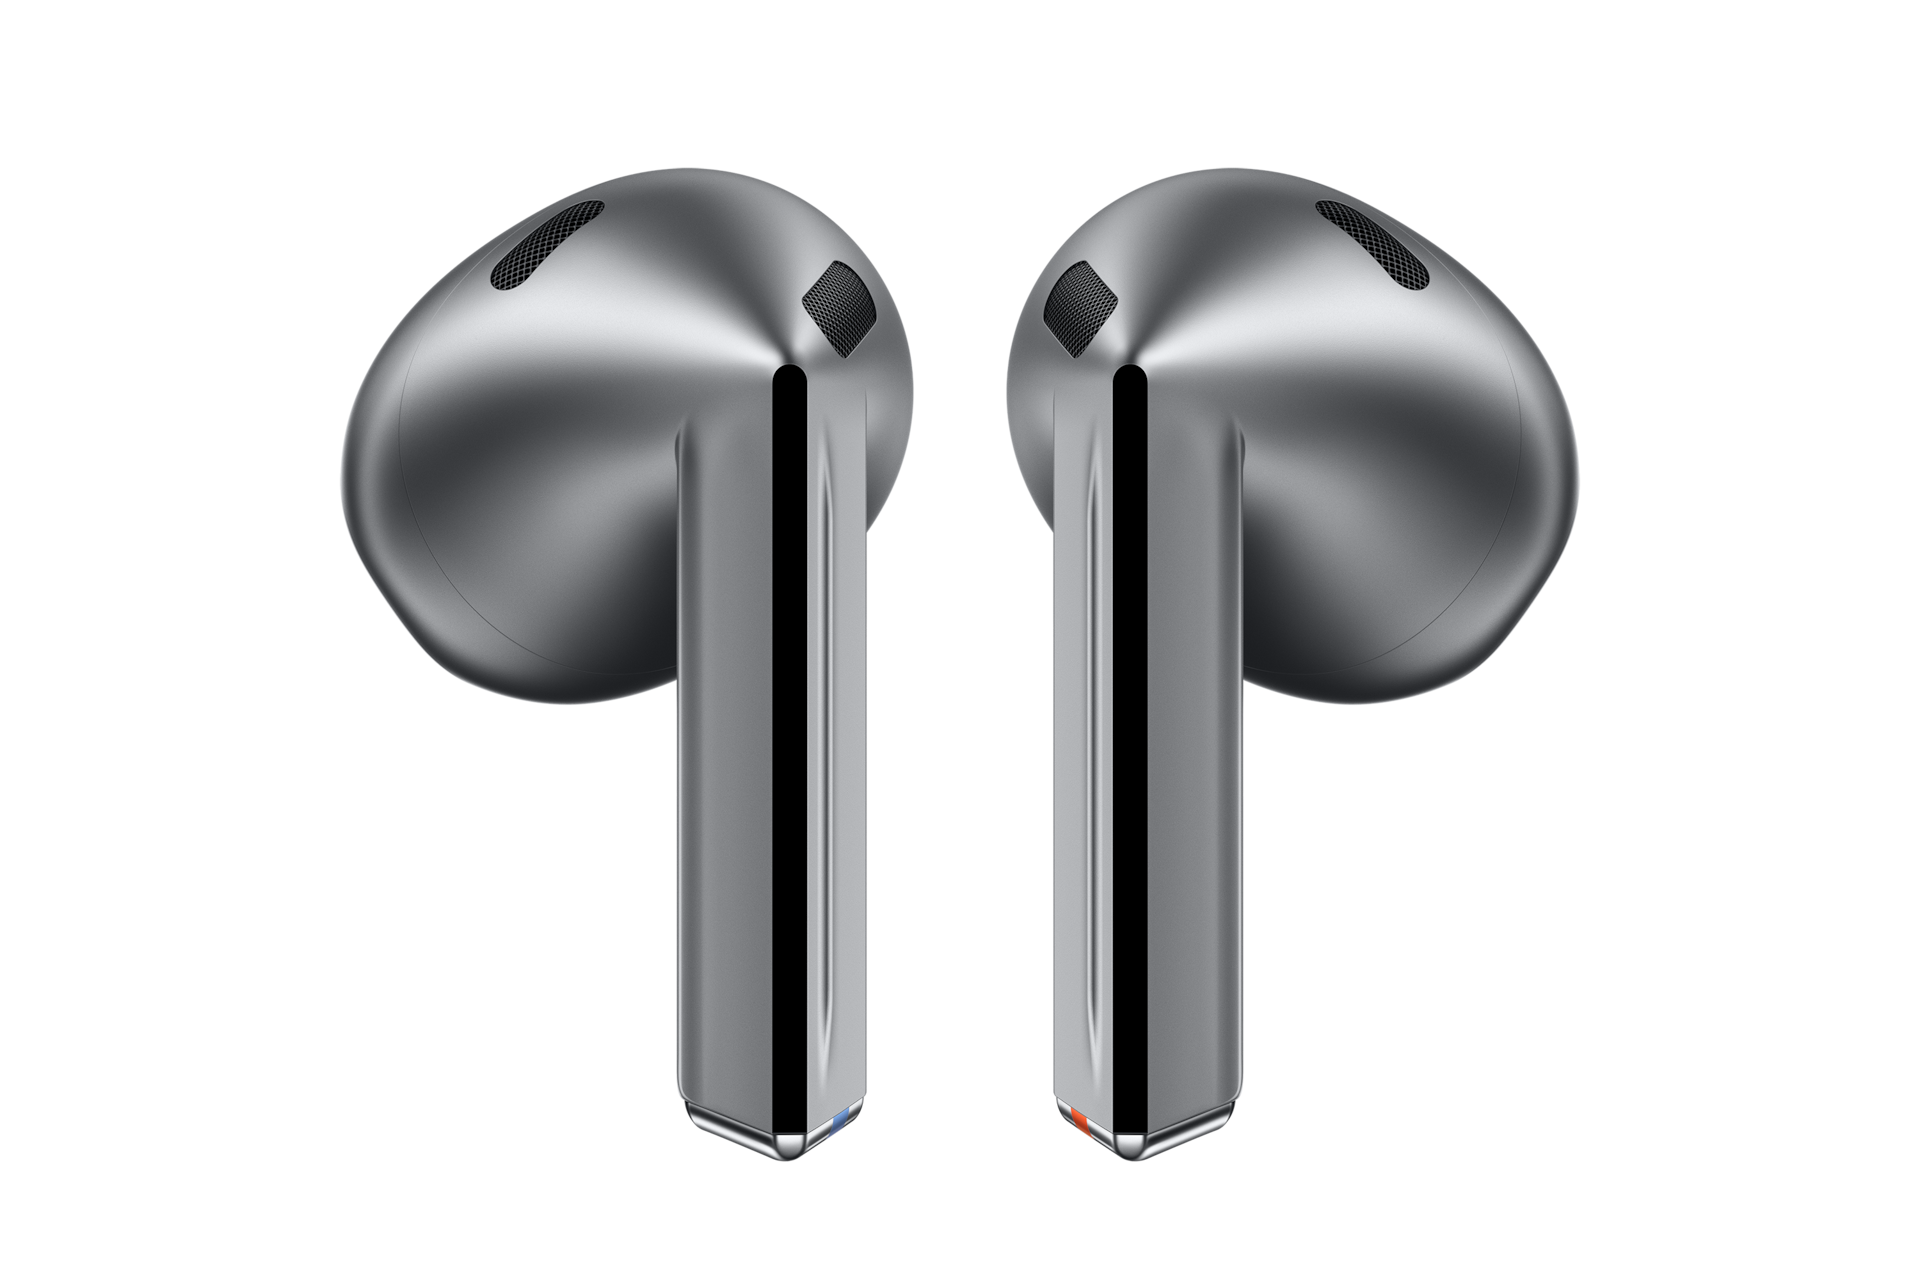 Buy Samsung Galaxy Buds 3 (SM-R530NZAAXME) in Silver color, available at Samsung Malaysia.